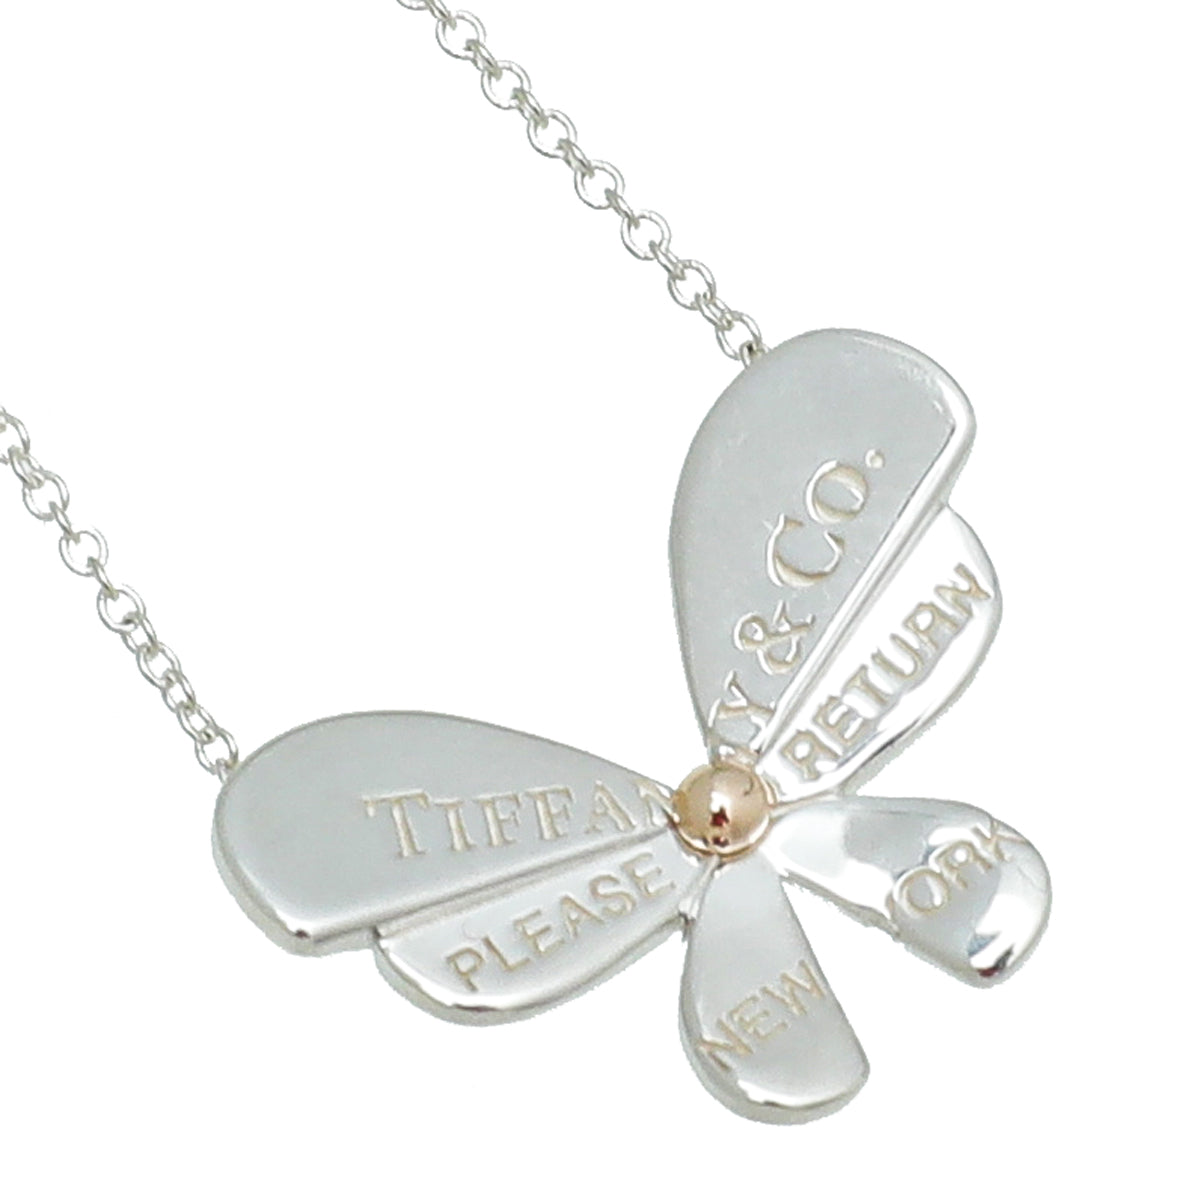 Tiffany & Co Sterling Silver & Rose Gold Love Bugs Butterfly Pendant Necklace